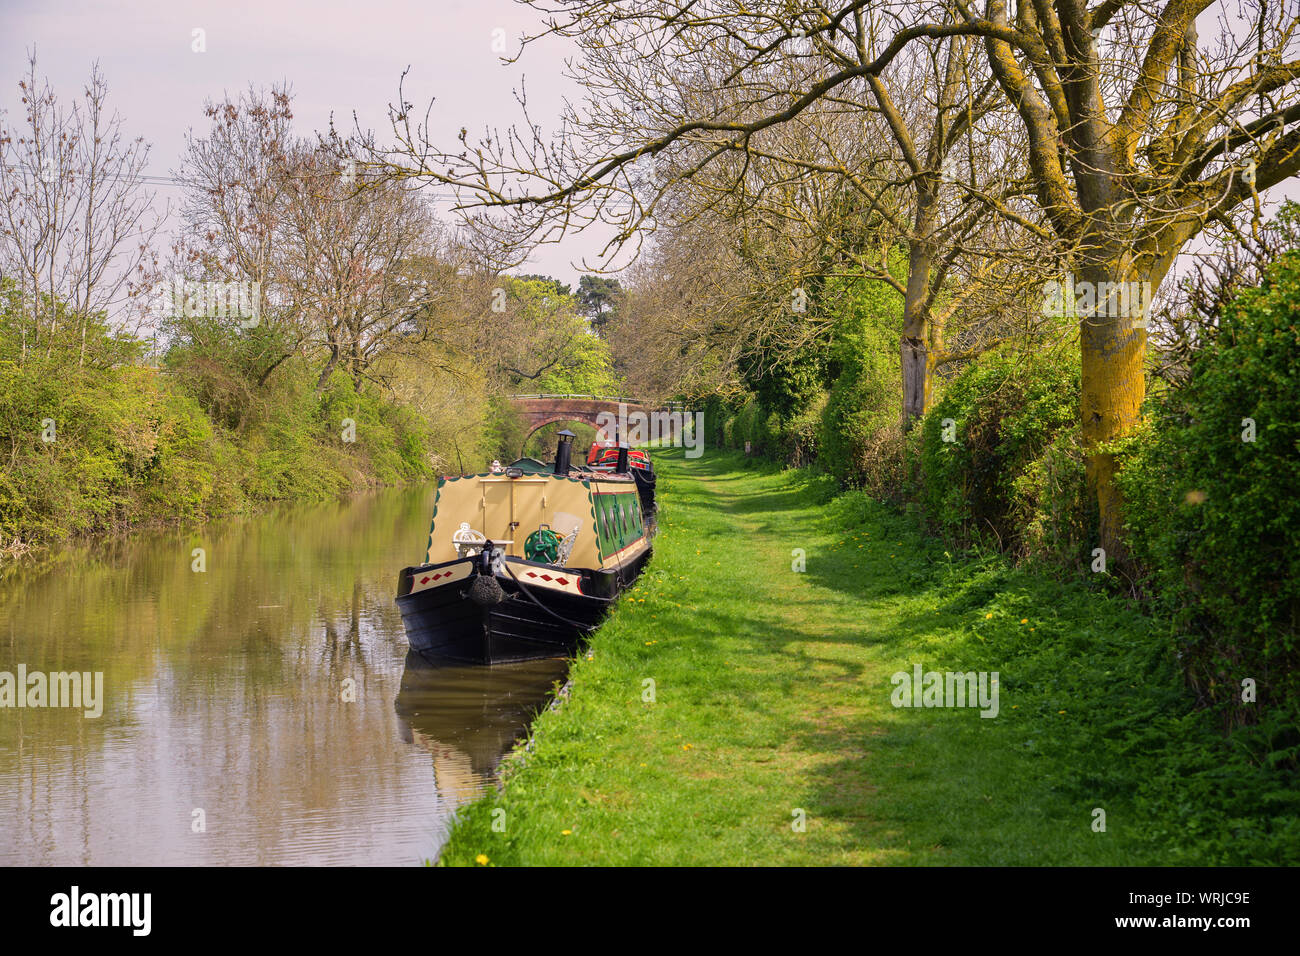 Narrow boats on Moored on canal side. Stock Photo